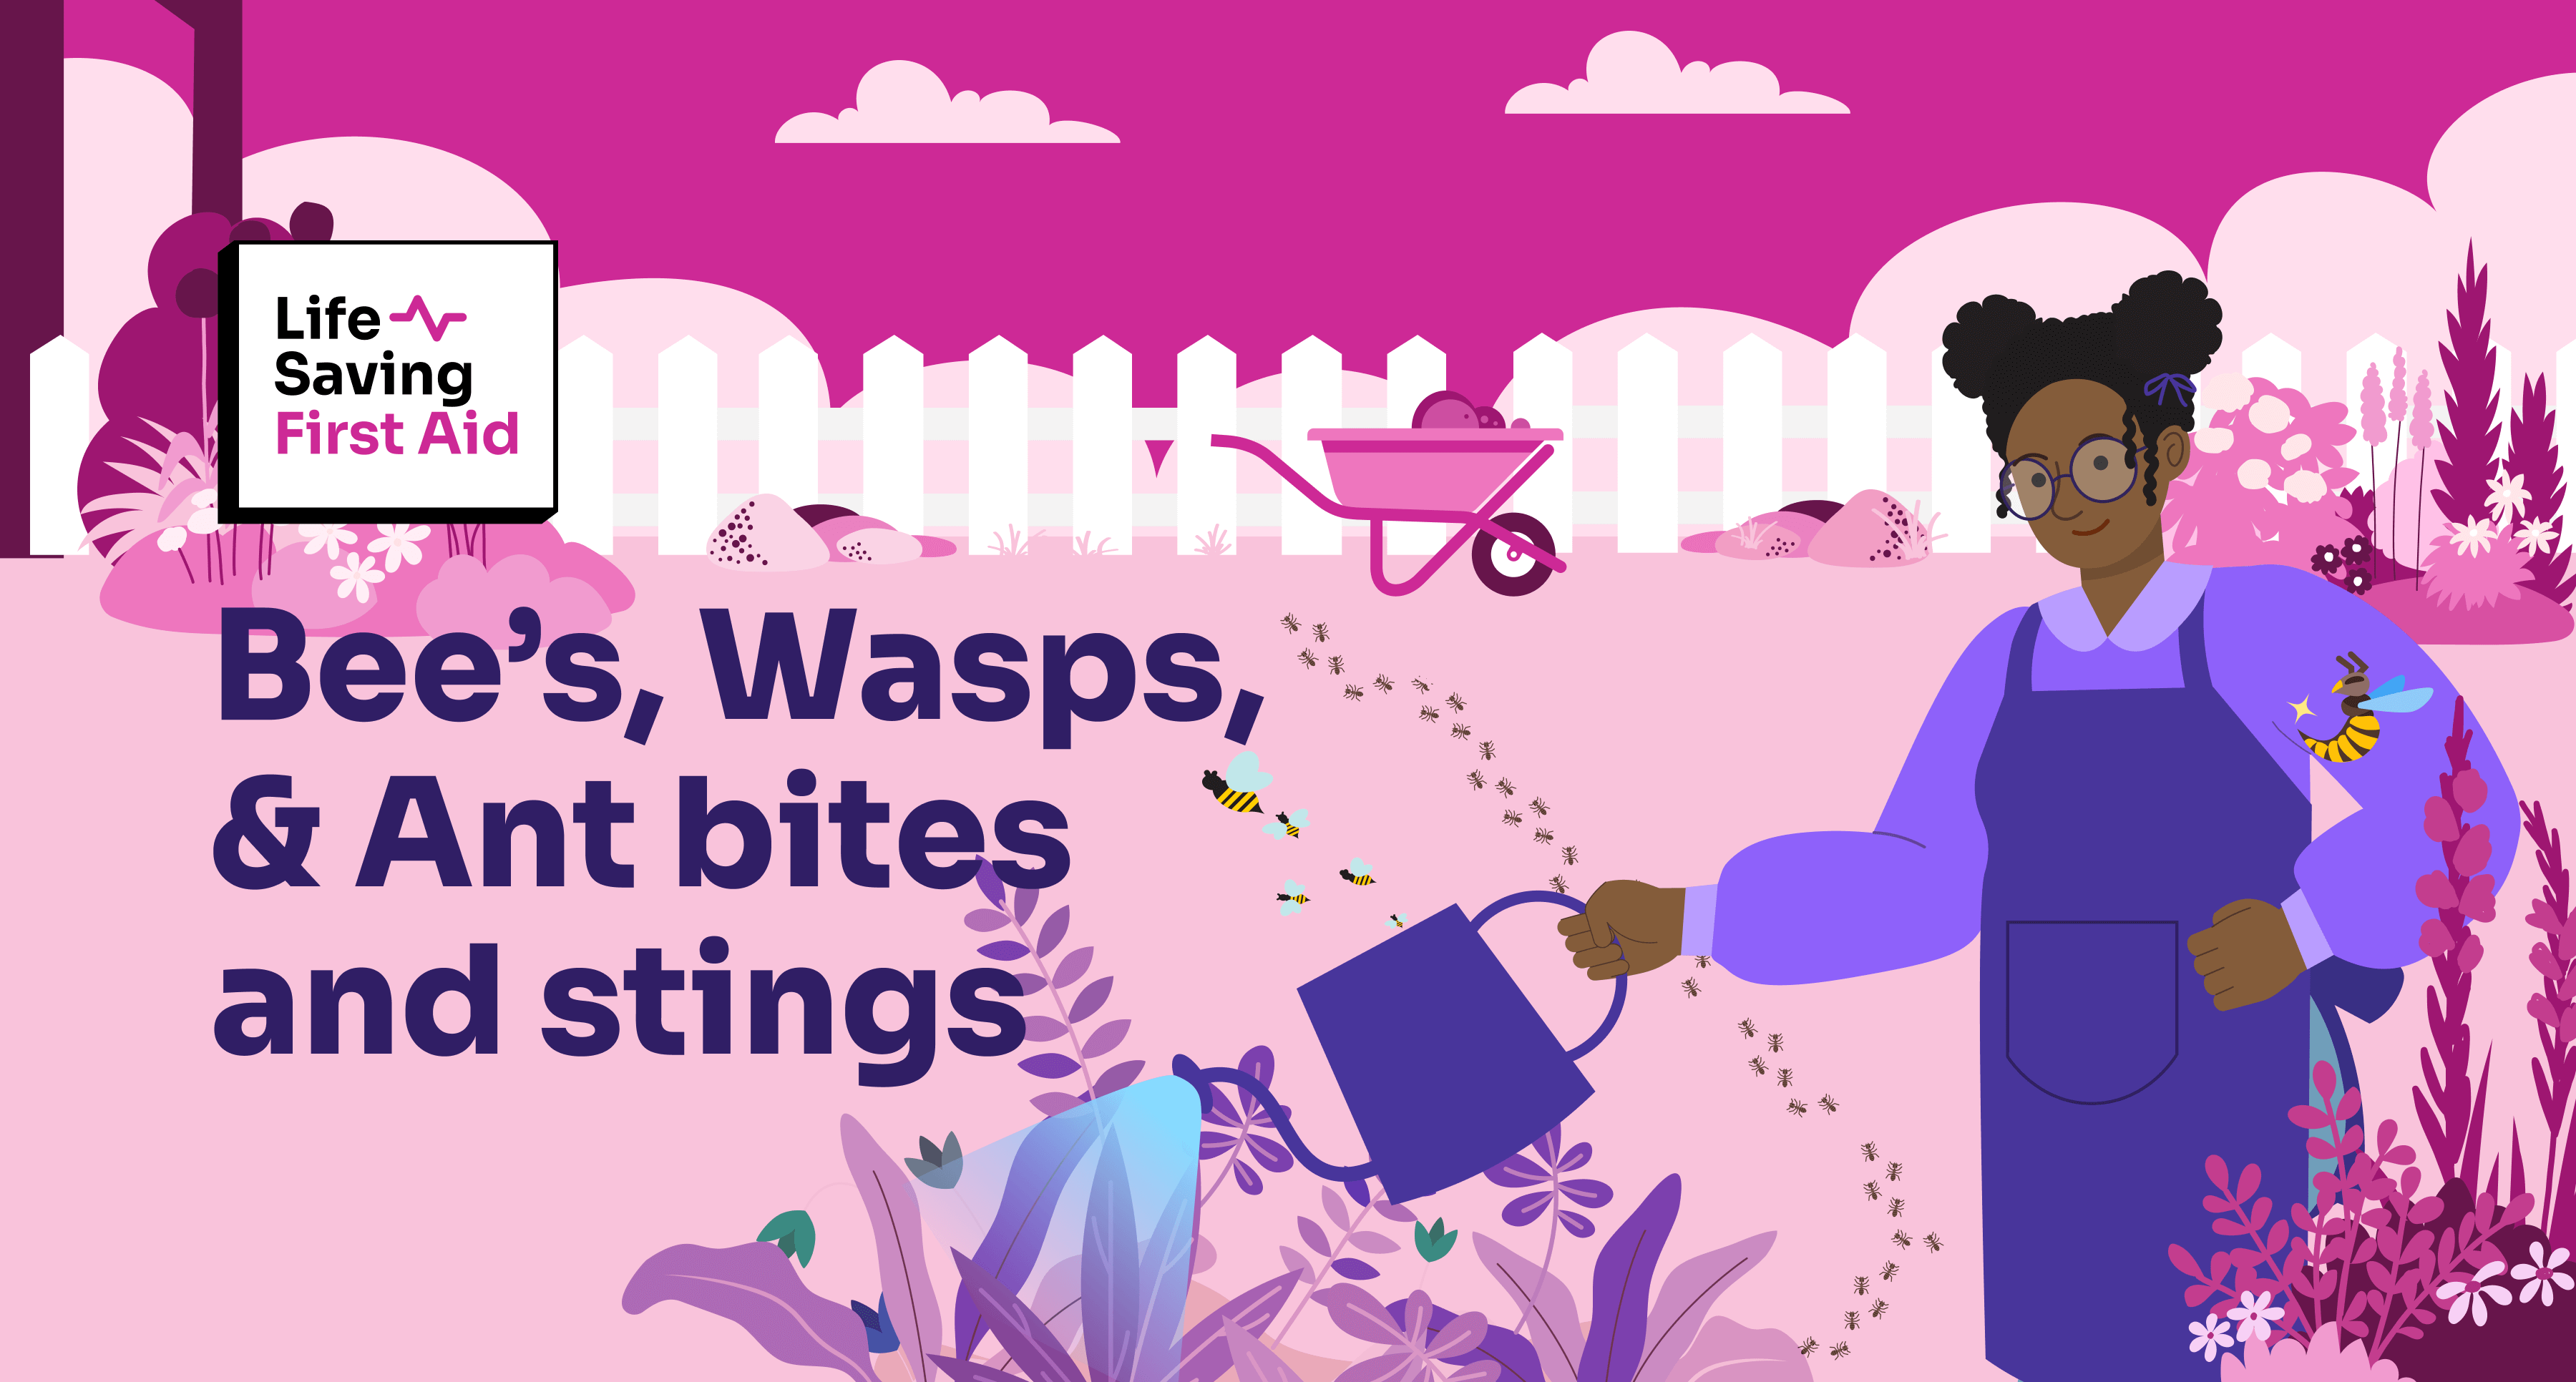 Bee’s, Wasps, & Ant bites and stings